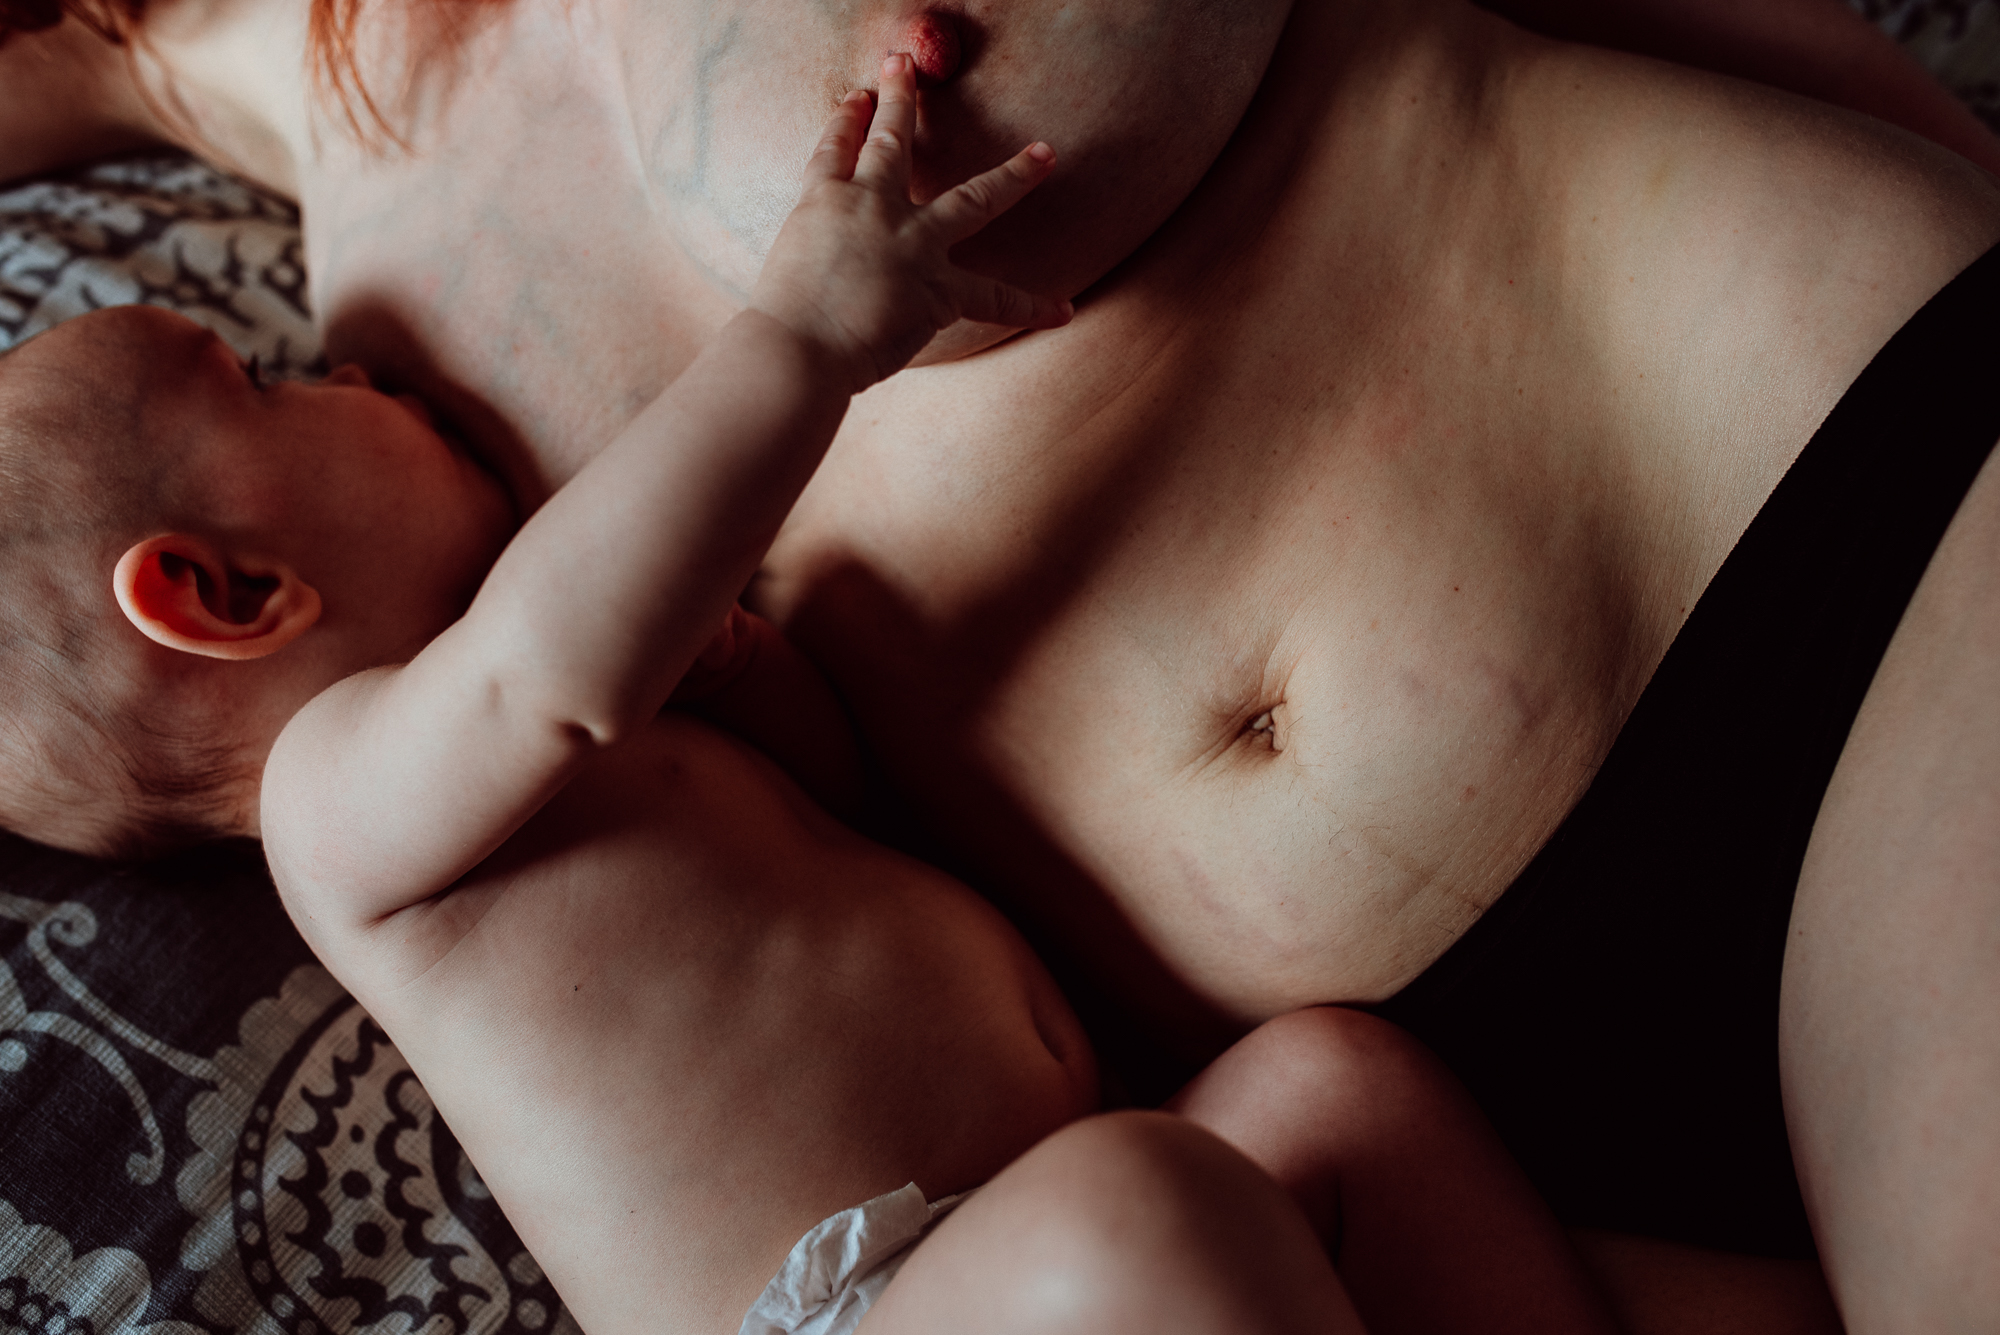 Minneapolis Postpartum Photography by Meredith Westin-May 14, 2019-125132.jpg